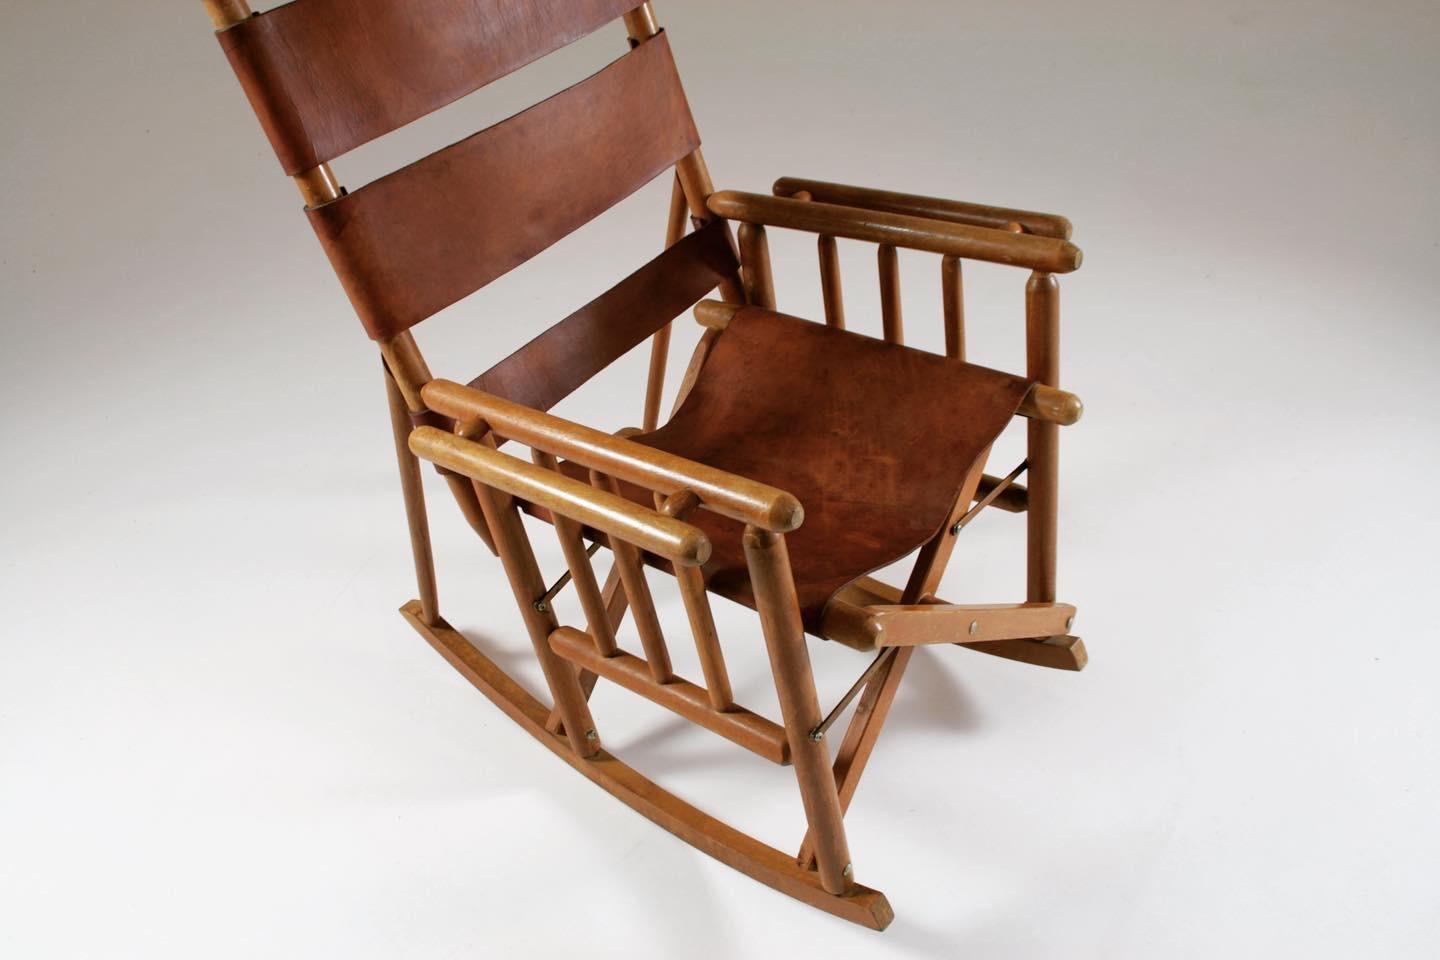 20th Century American Foldable Wood and Leather Rocking Chair, 1960s